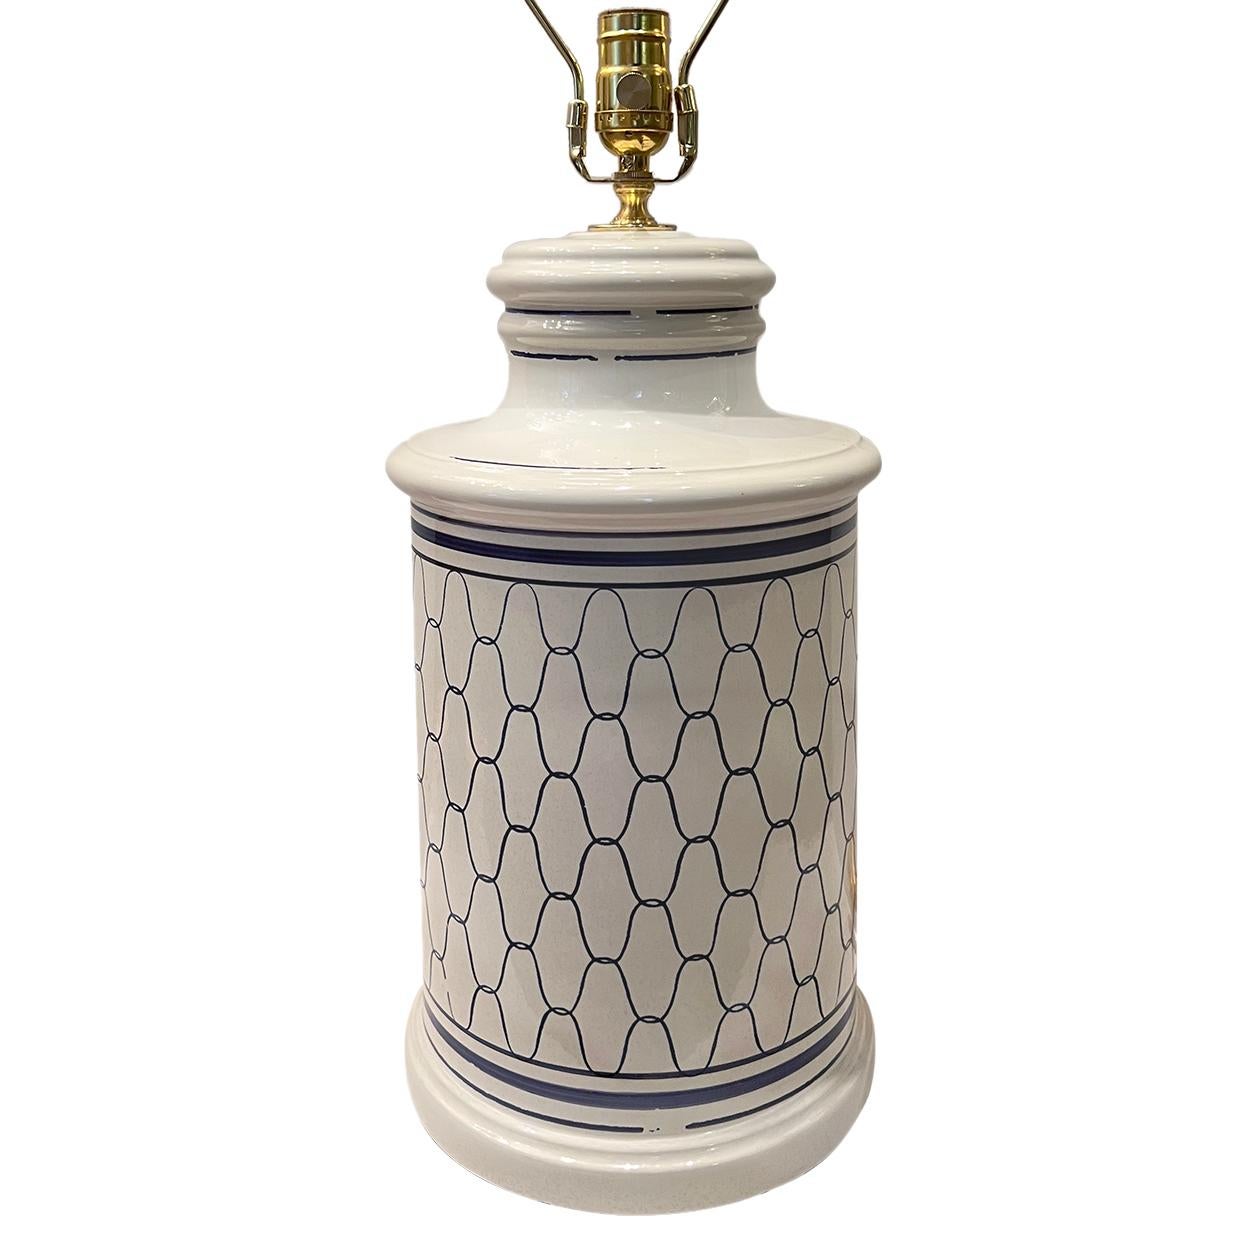 A circa 1950's Italian white and blue porcelain lamp.

Measurements:
Height of body: 17